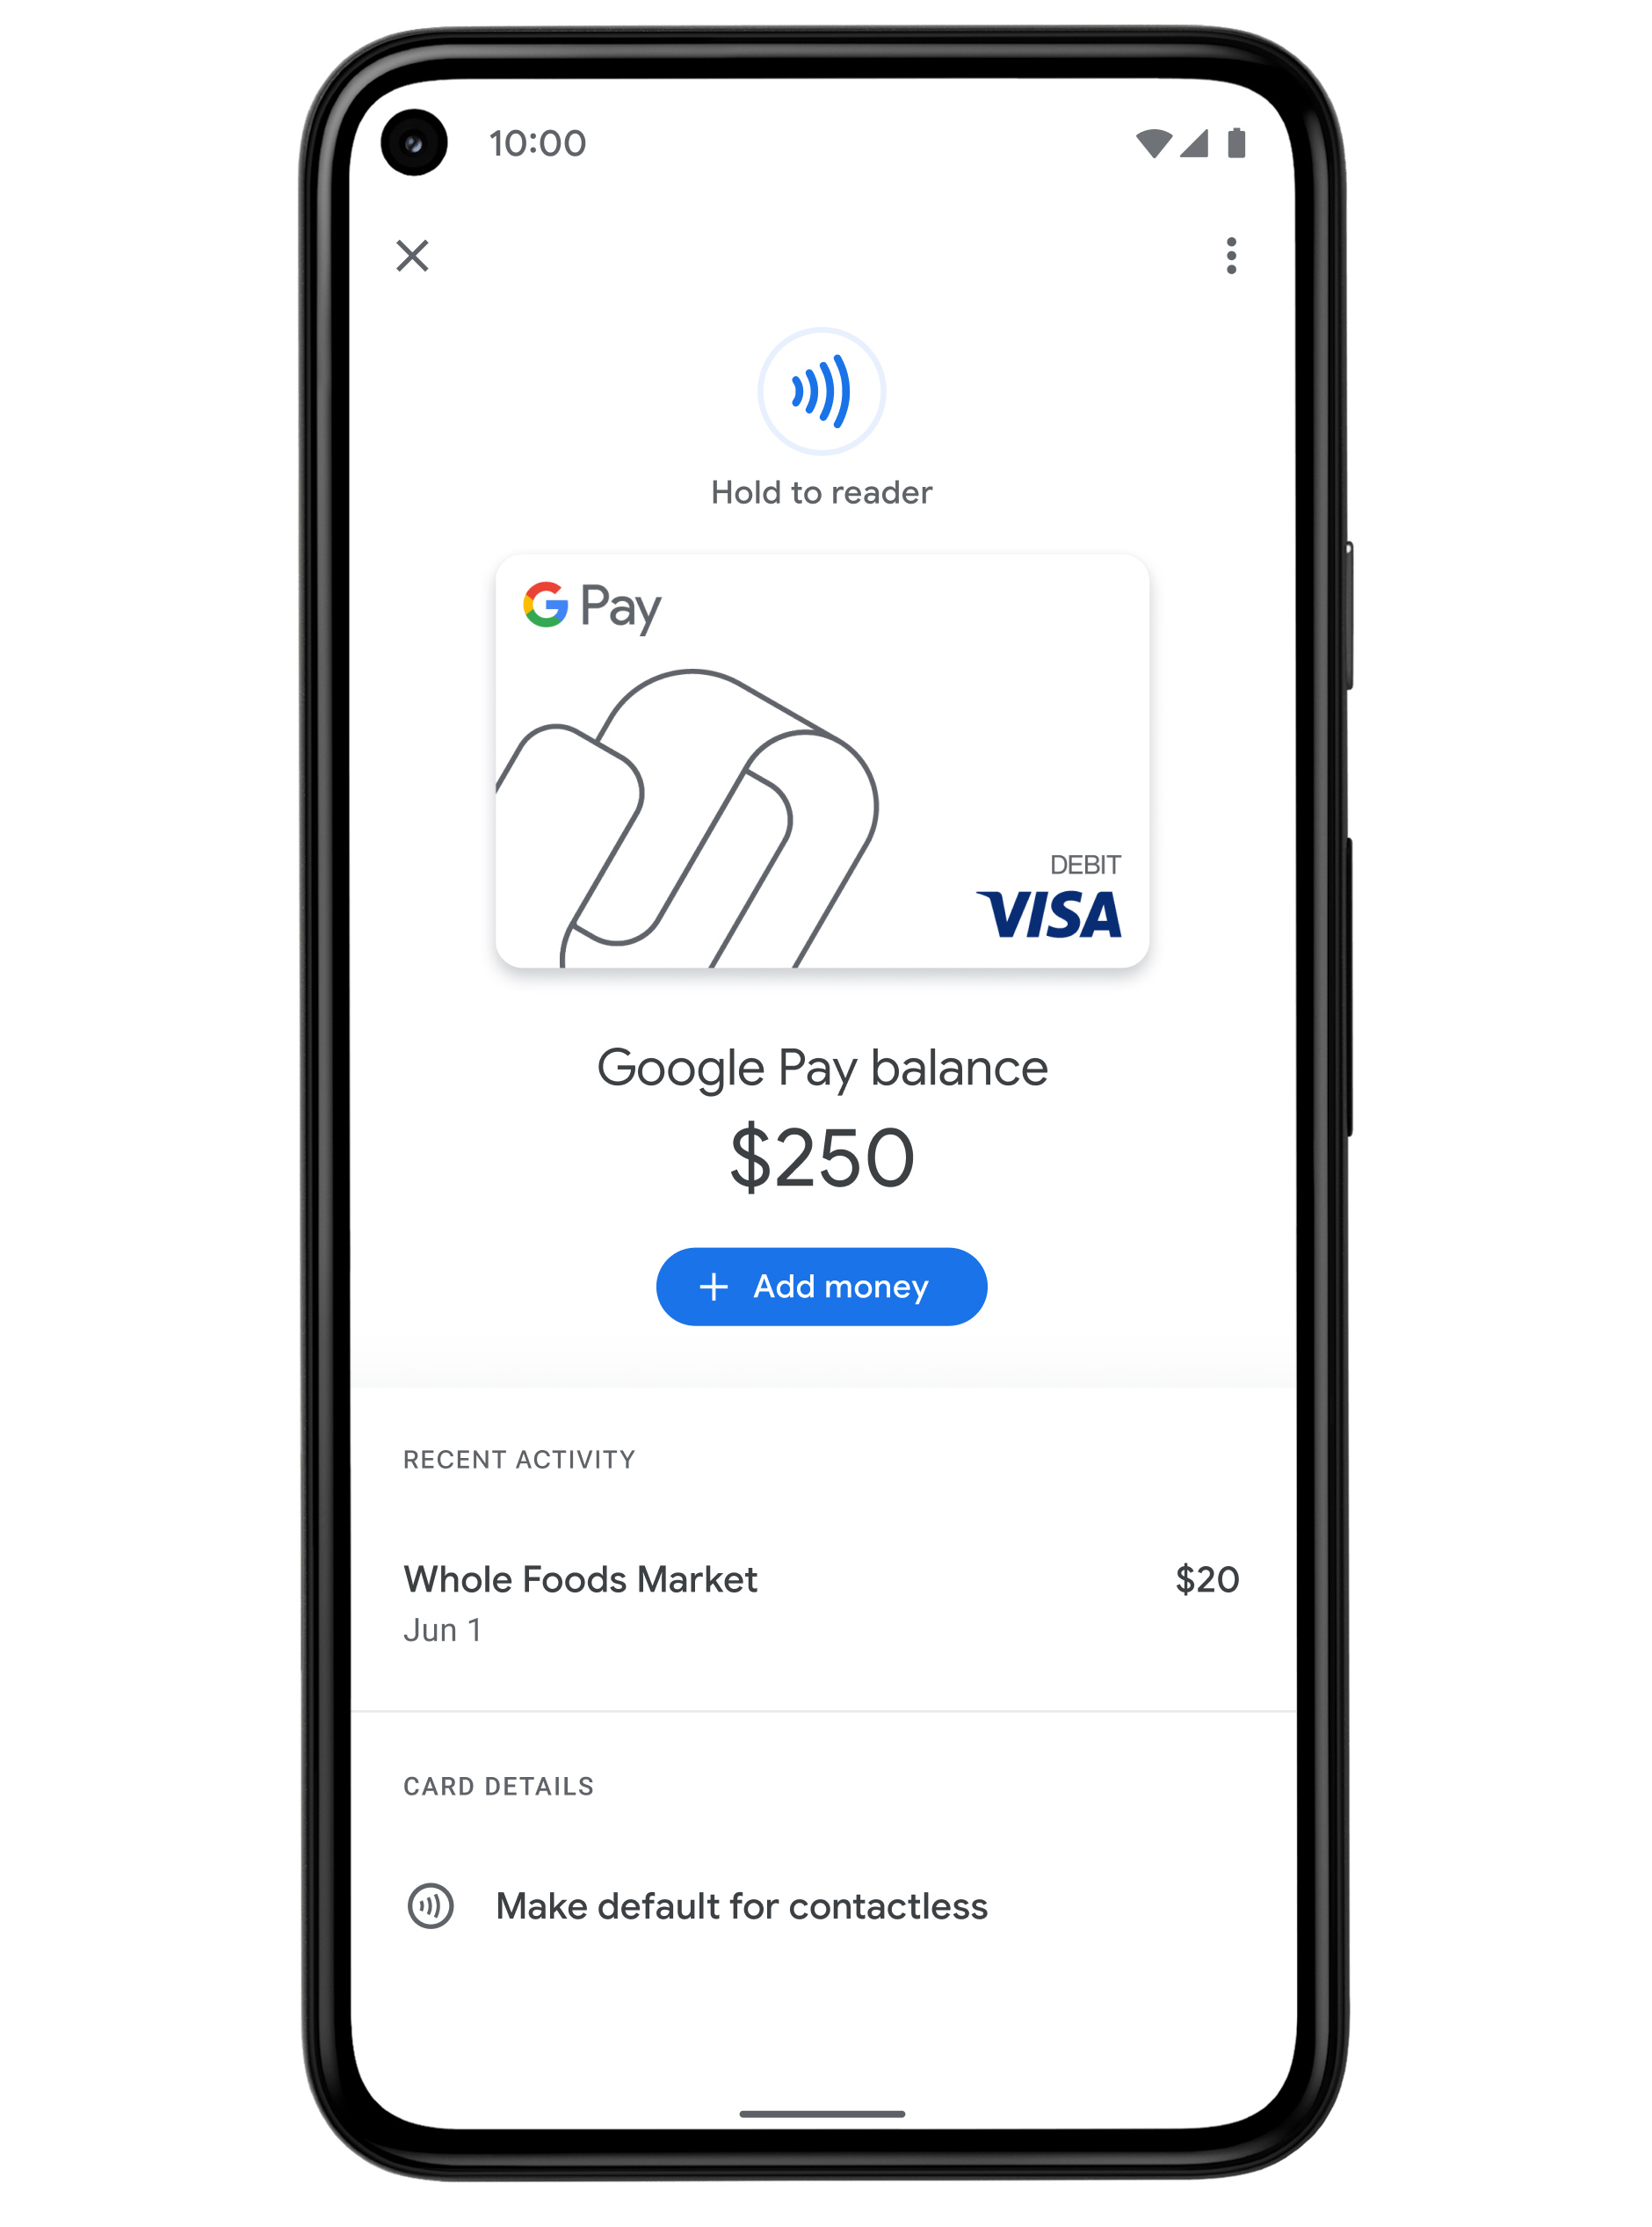 New Google Pay debit card lets you actually spend the money people send you